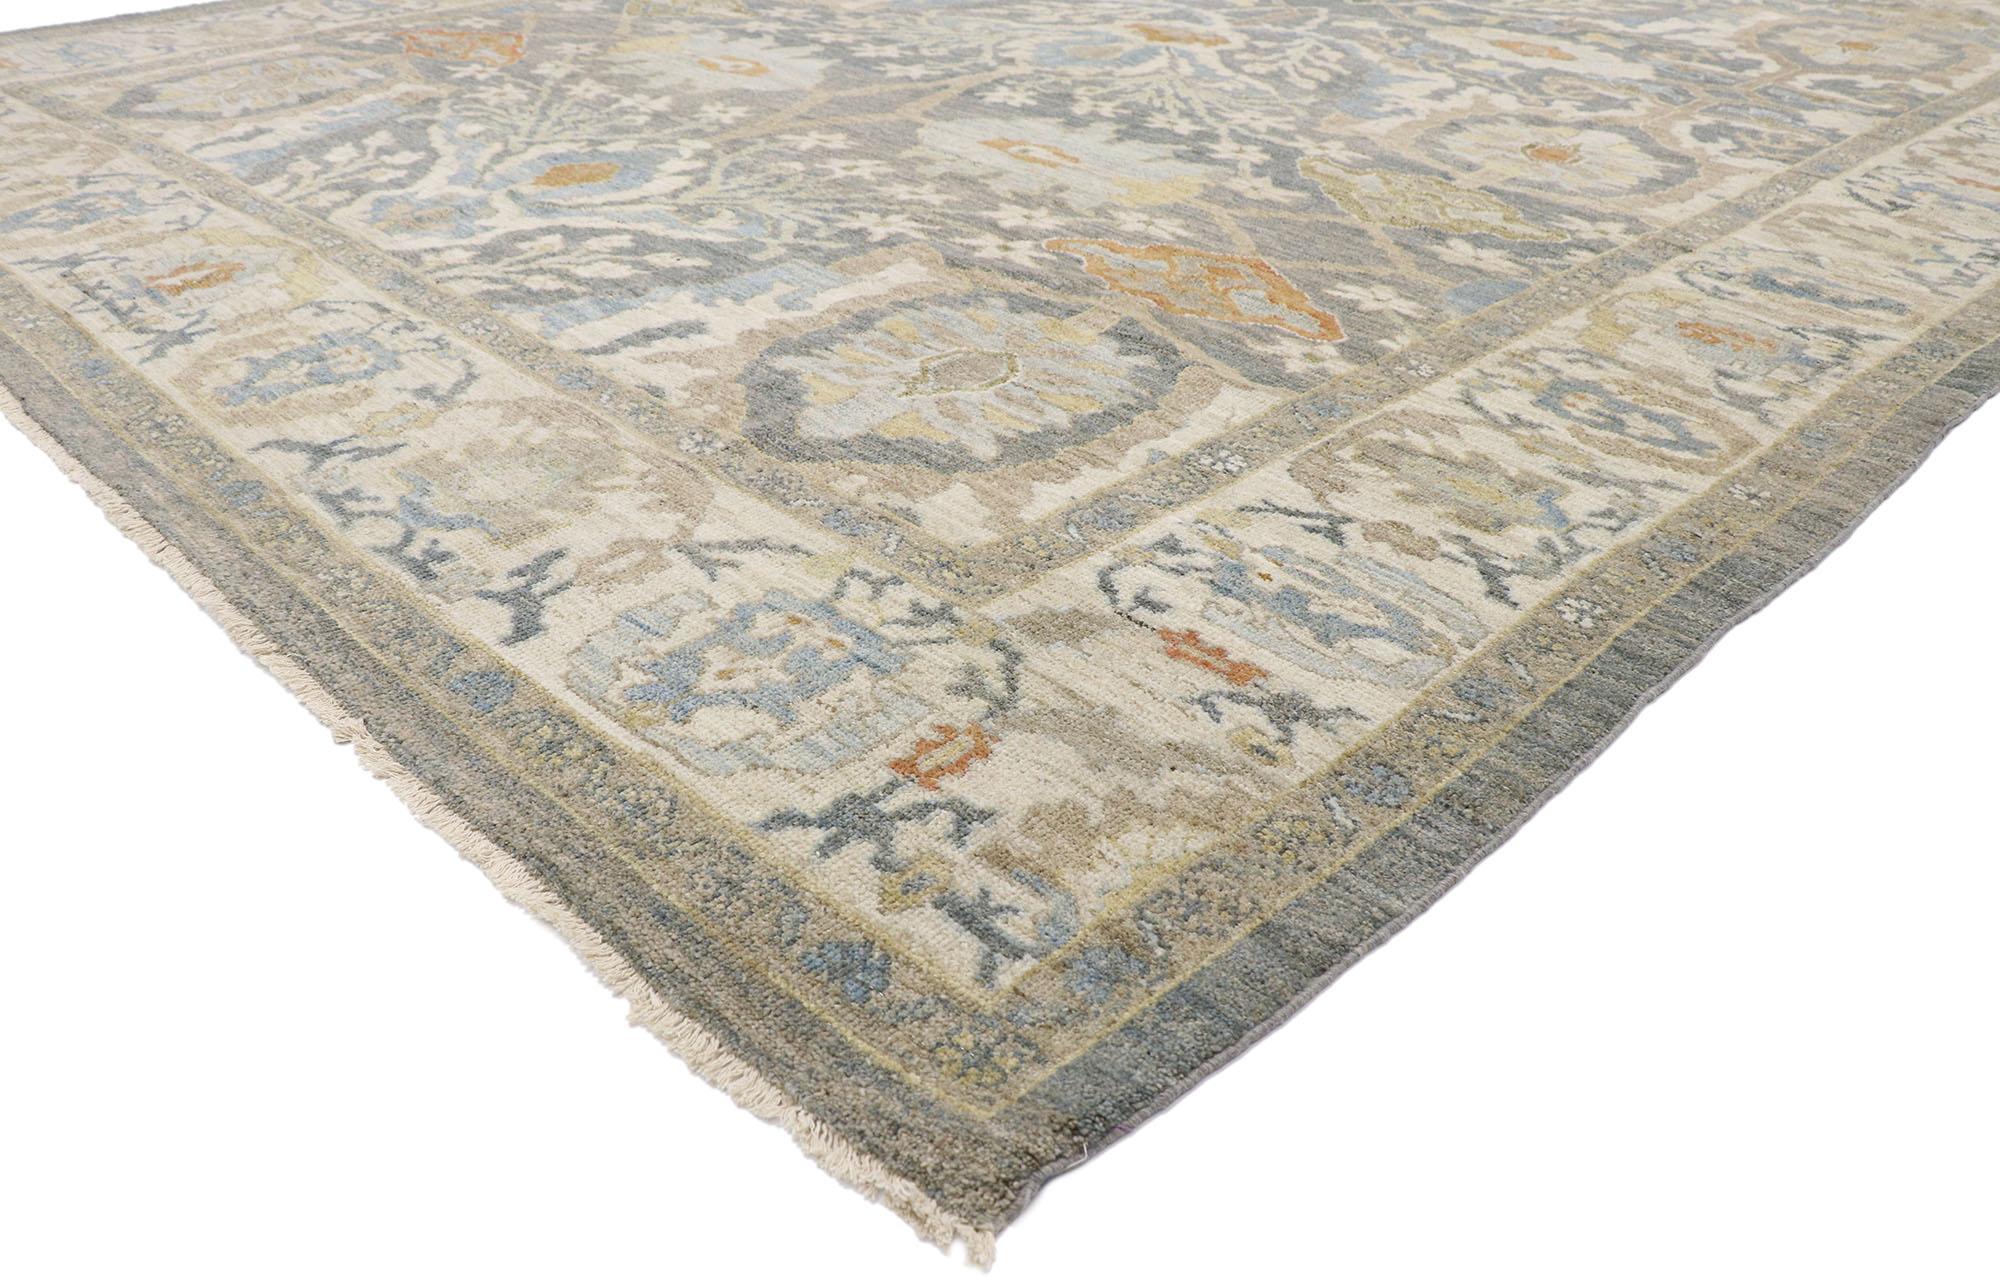 60868, new contemporary Persian Sultanabad rug with Modern Transitional style. Understated elegance combined with cool gray hues and blue undertones, this hand-knotted wool contemporary Persian Sultanabad rug creates an inimitable warmth and calming